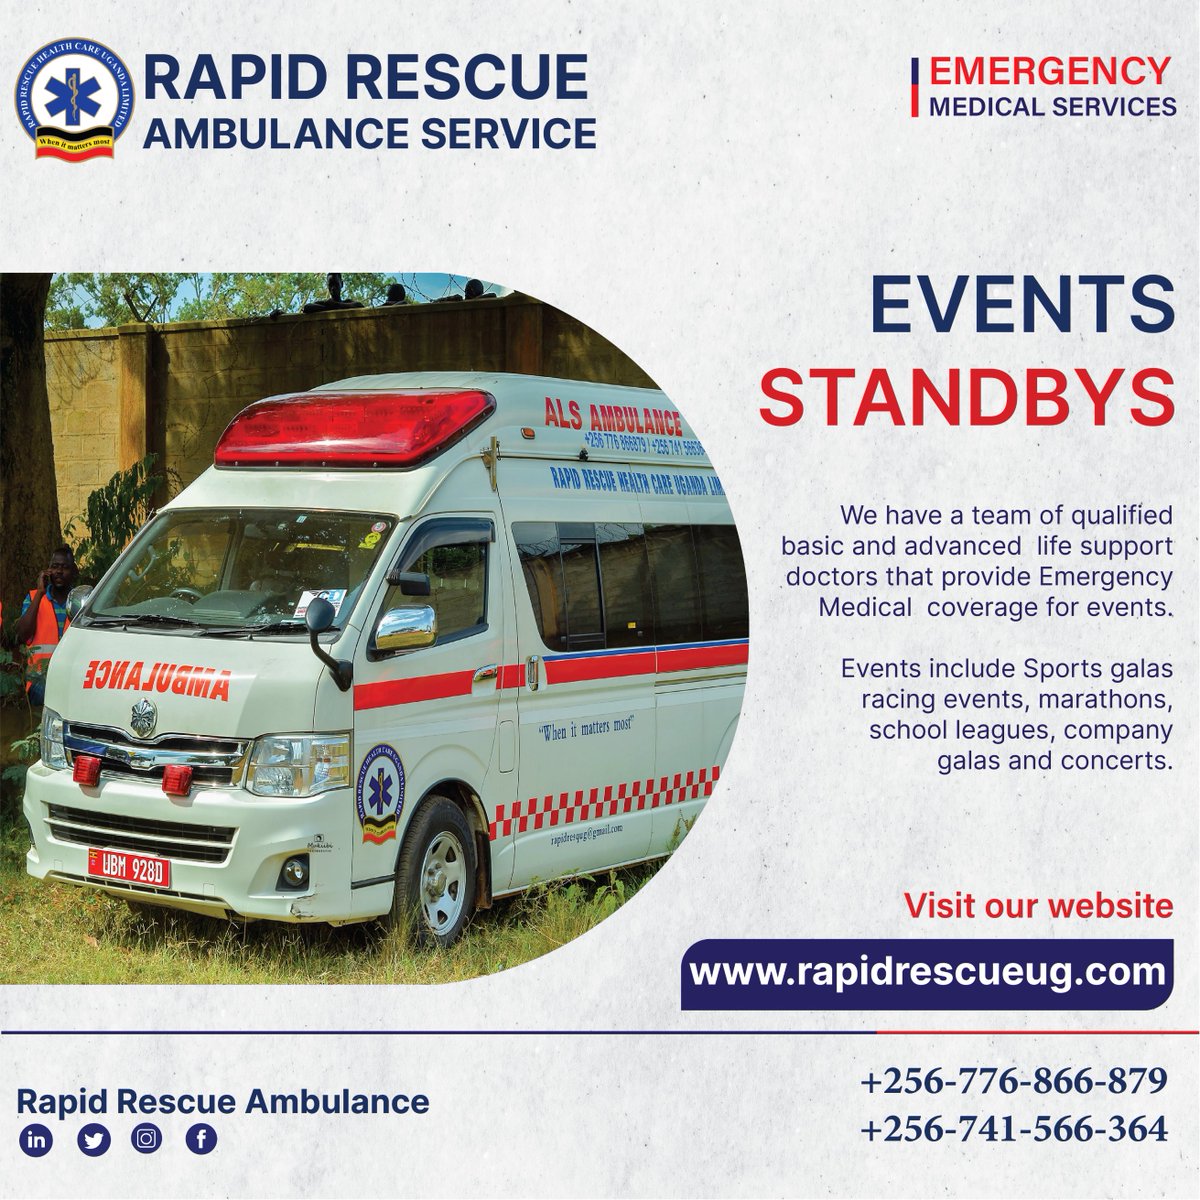 @Kyewaggula_Home @Megsport01 @GreatOutdoorsUg @RegenerateAfri @Aquafina @RunKyewaggula For Your Events medical cover.. look no further but
@RapidRescue3
Let's get your event covered up with the suitable event emergency procedures.

#ClimateAction #SDG15 @UNDPClimate 
@NFAUG @legendsmarathon @KyambogoRun